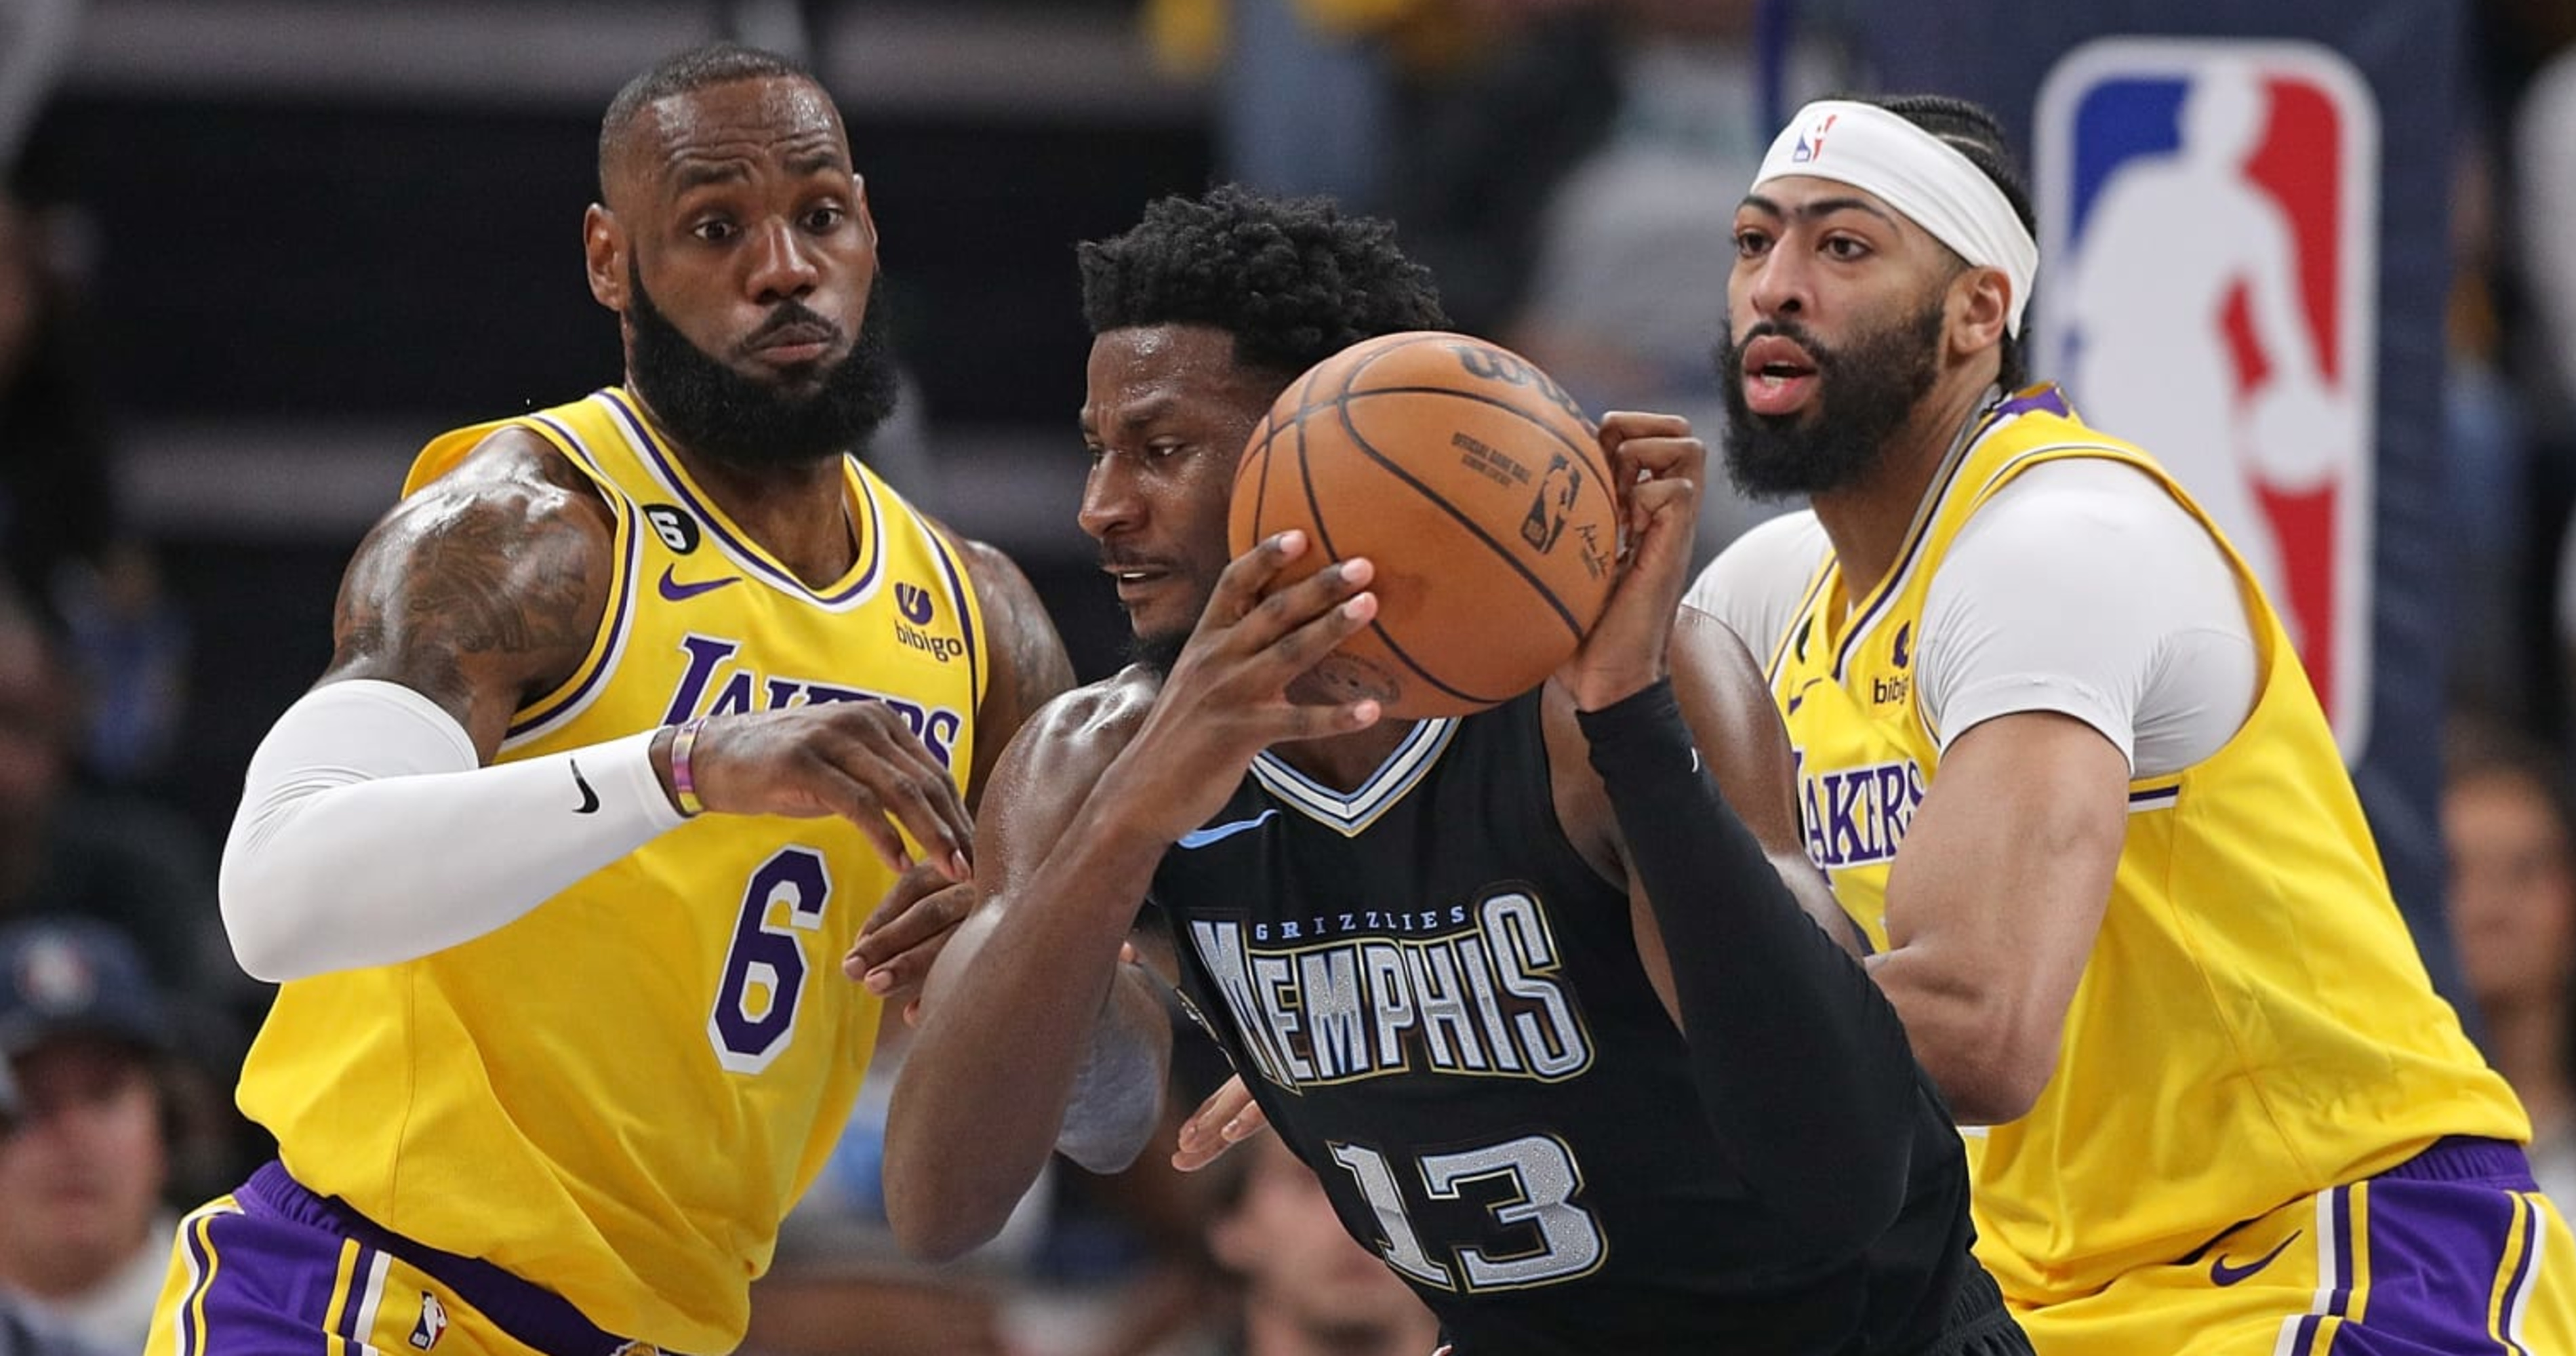 Rui Hachimura 'Was Waiting for This Moment' in Lakers Game 3 Win Over  Grizzlies